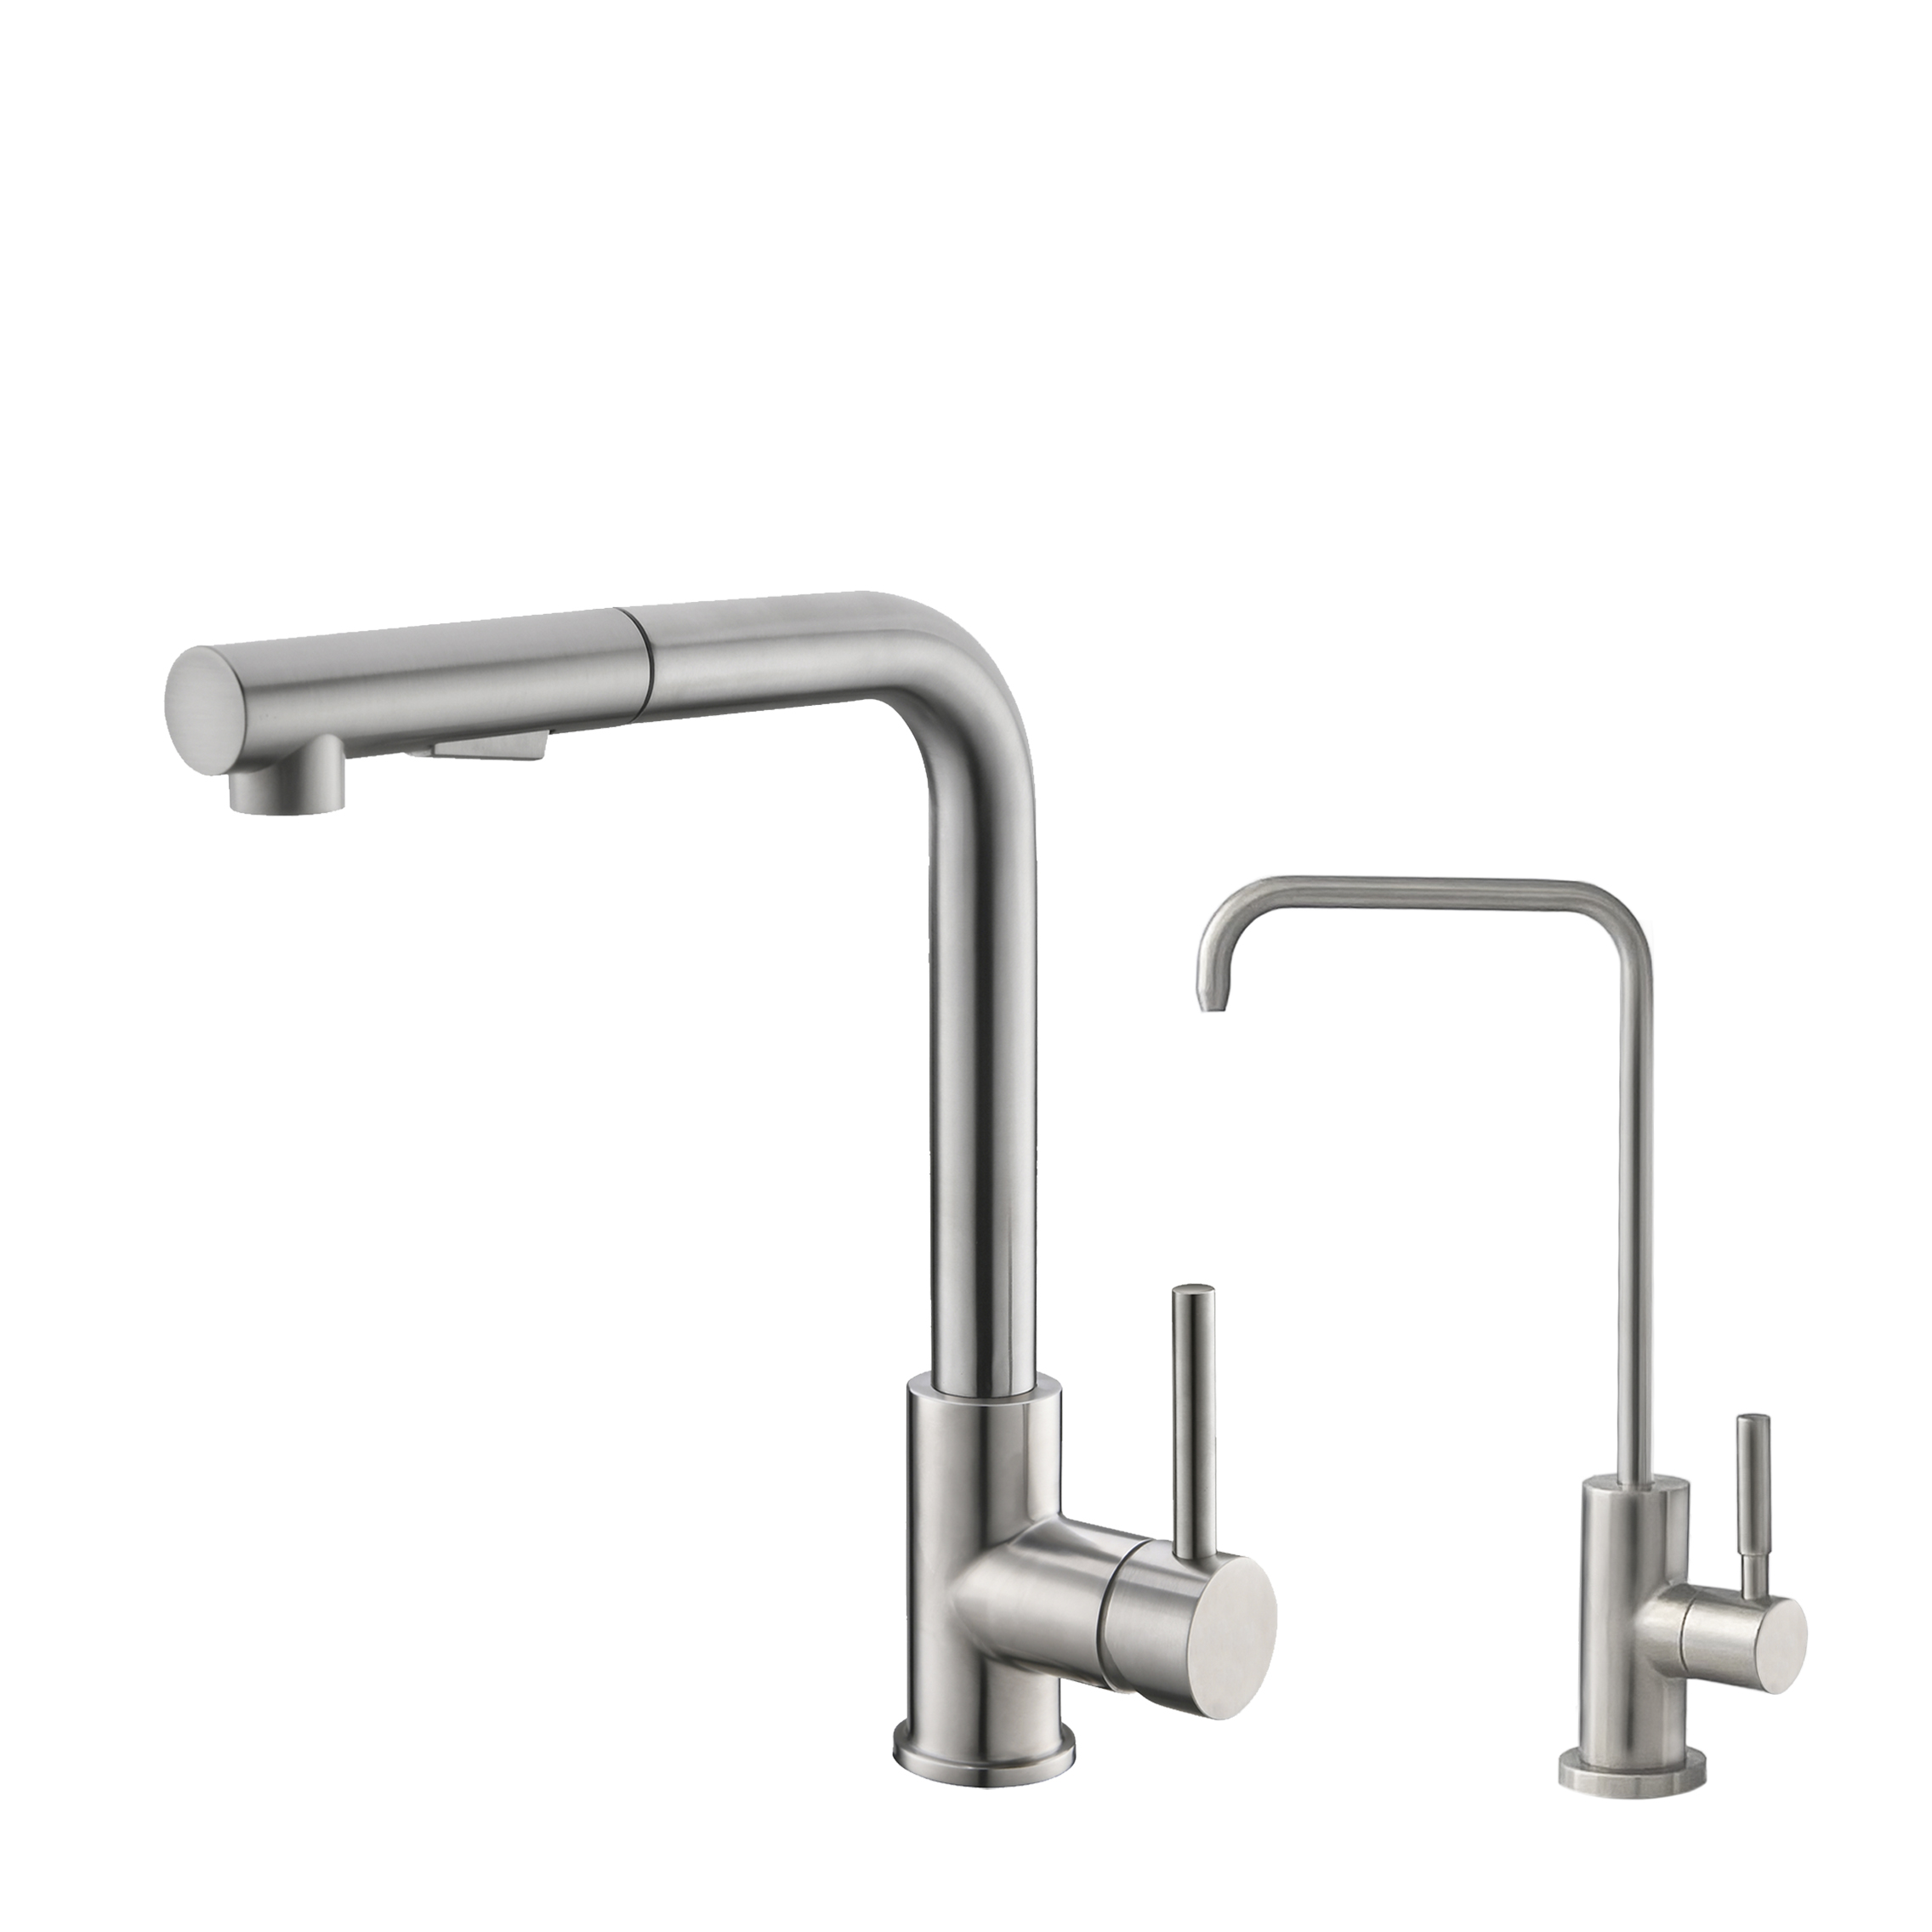 STYLISH K130K147 12 5/8 INCH STAINLESS STEEL PULL DOWN KITCHEN FAUCET WITH WATER TAP